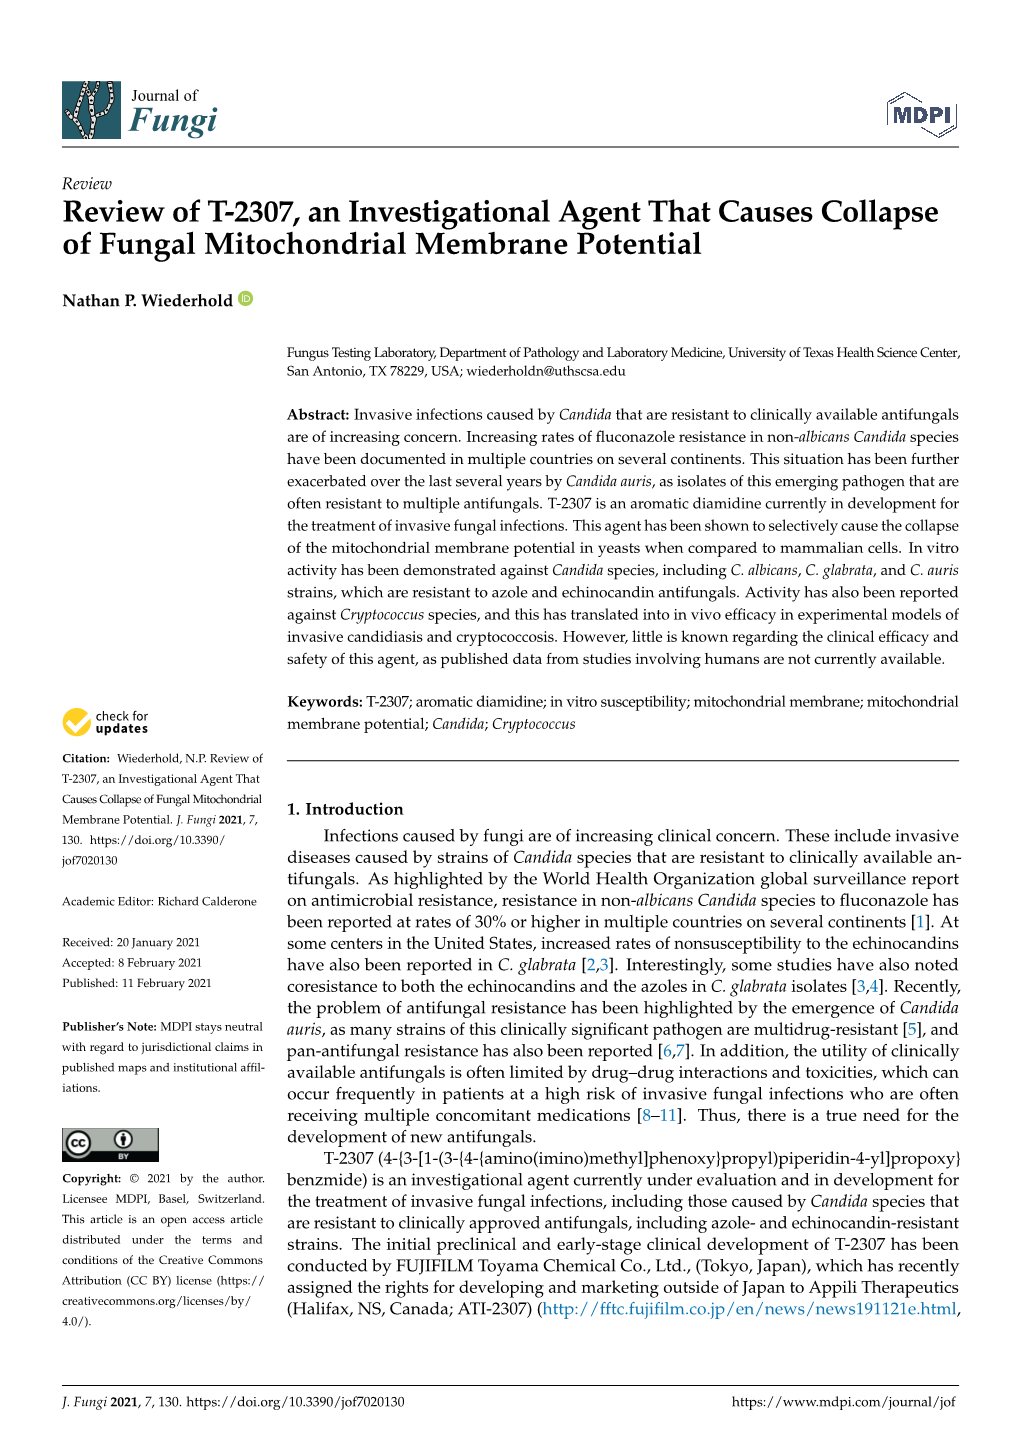 Review of T-2307, an Investigational Agent That Causes Collapse of Fungal Mitochondrial Membrane Potential